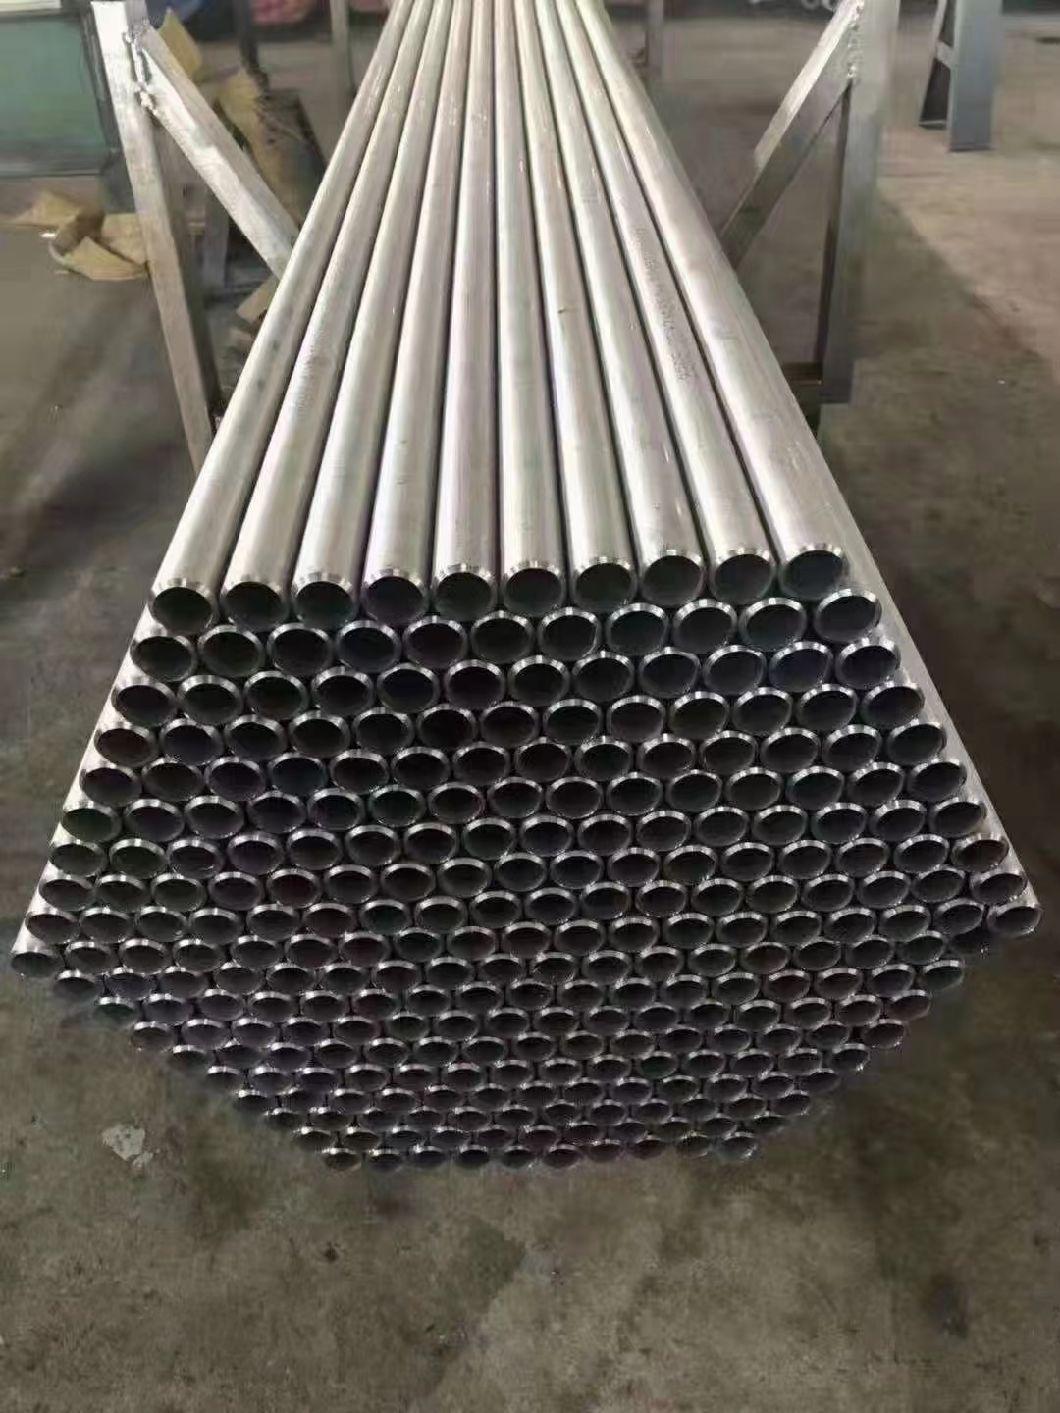 SS304 SS316 S2507 S2205 254smo Austenitic Alloy and Duplex Stainless Steel Seamless Pipe Ss Pipe